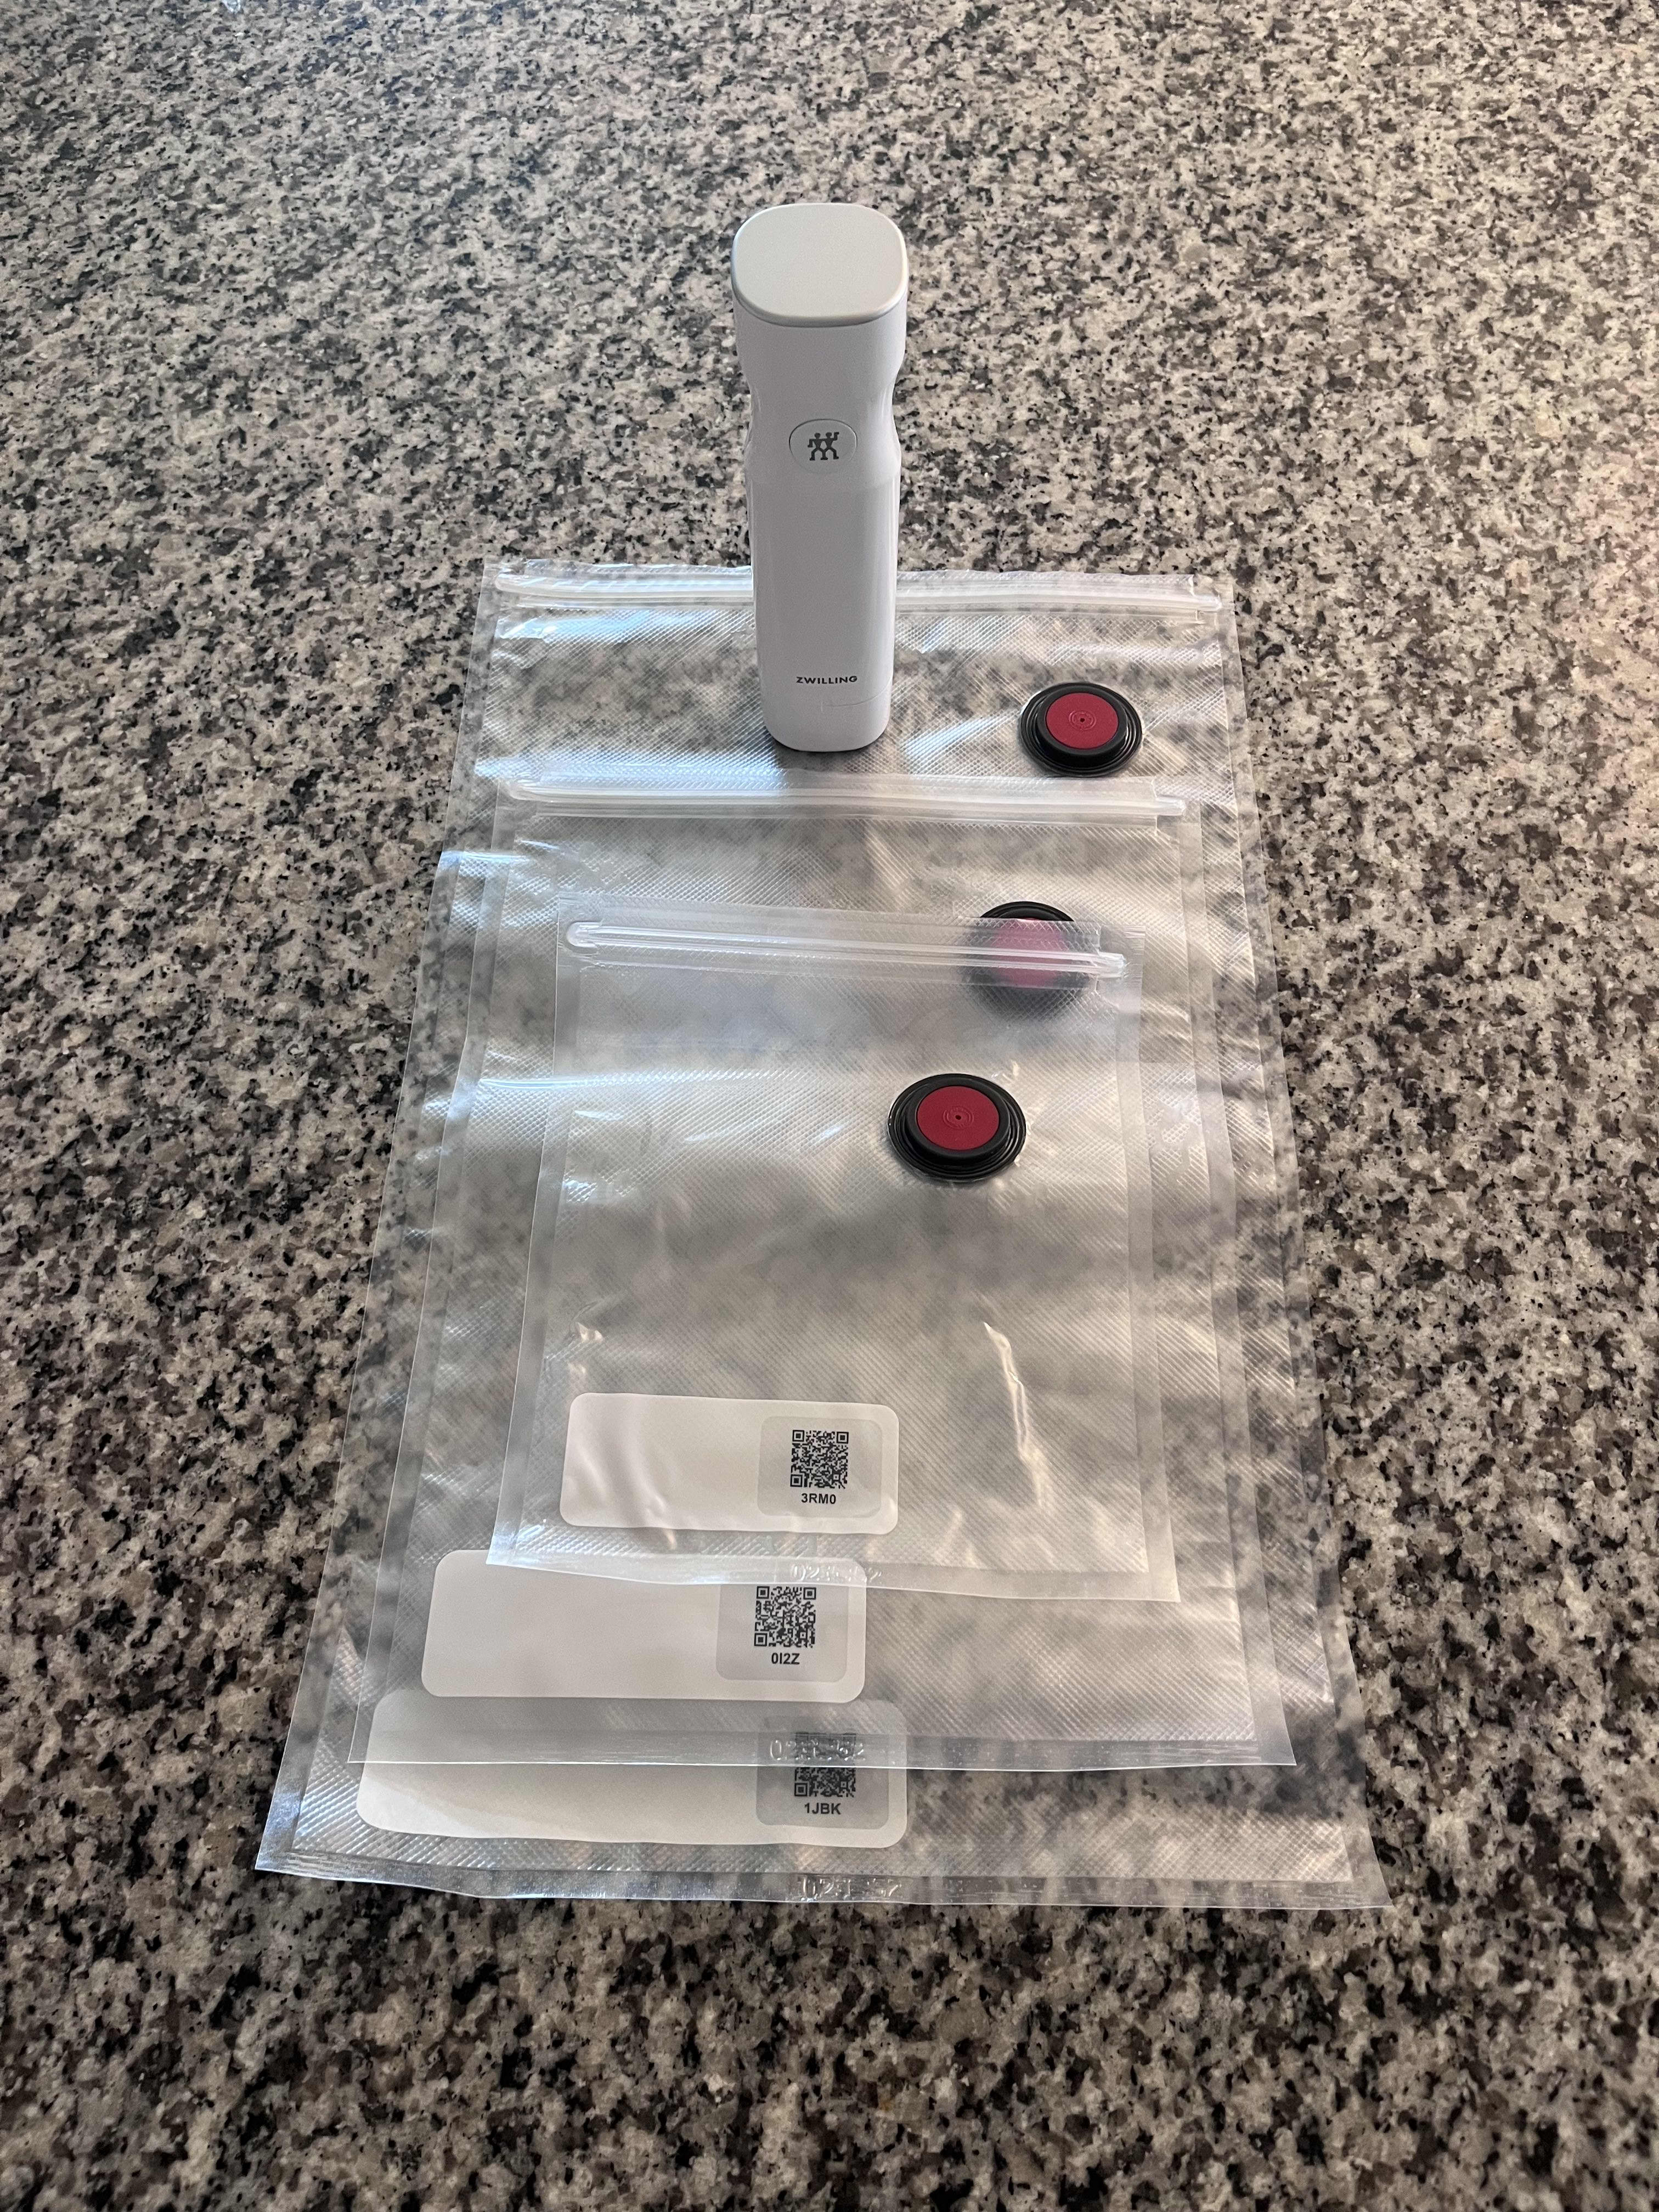 Zwilling Vacuum Sealer Review: Will It Keep My Food Fresher, Longer?